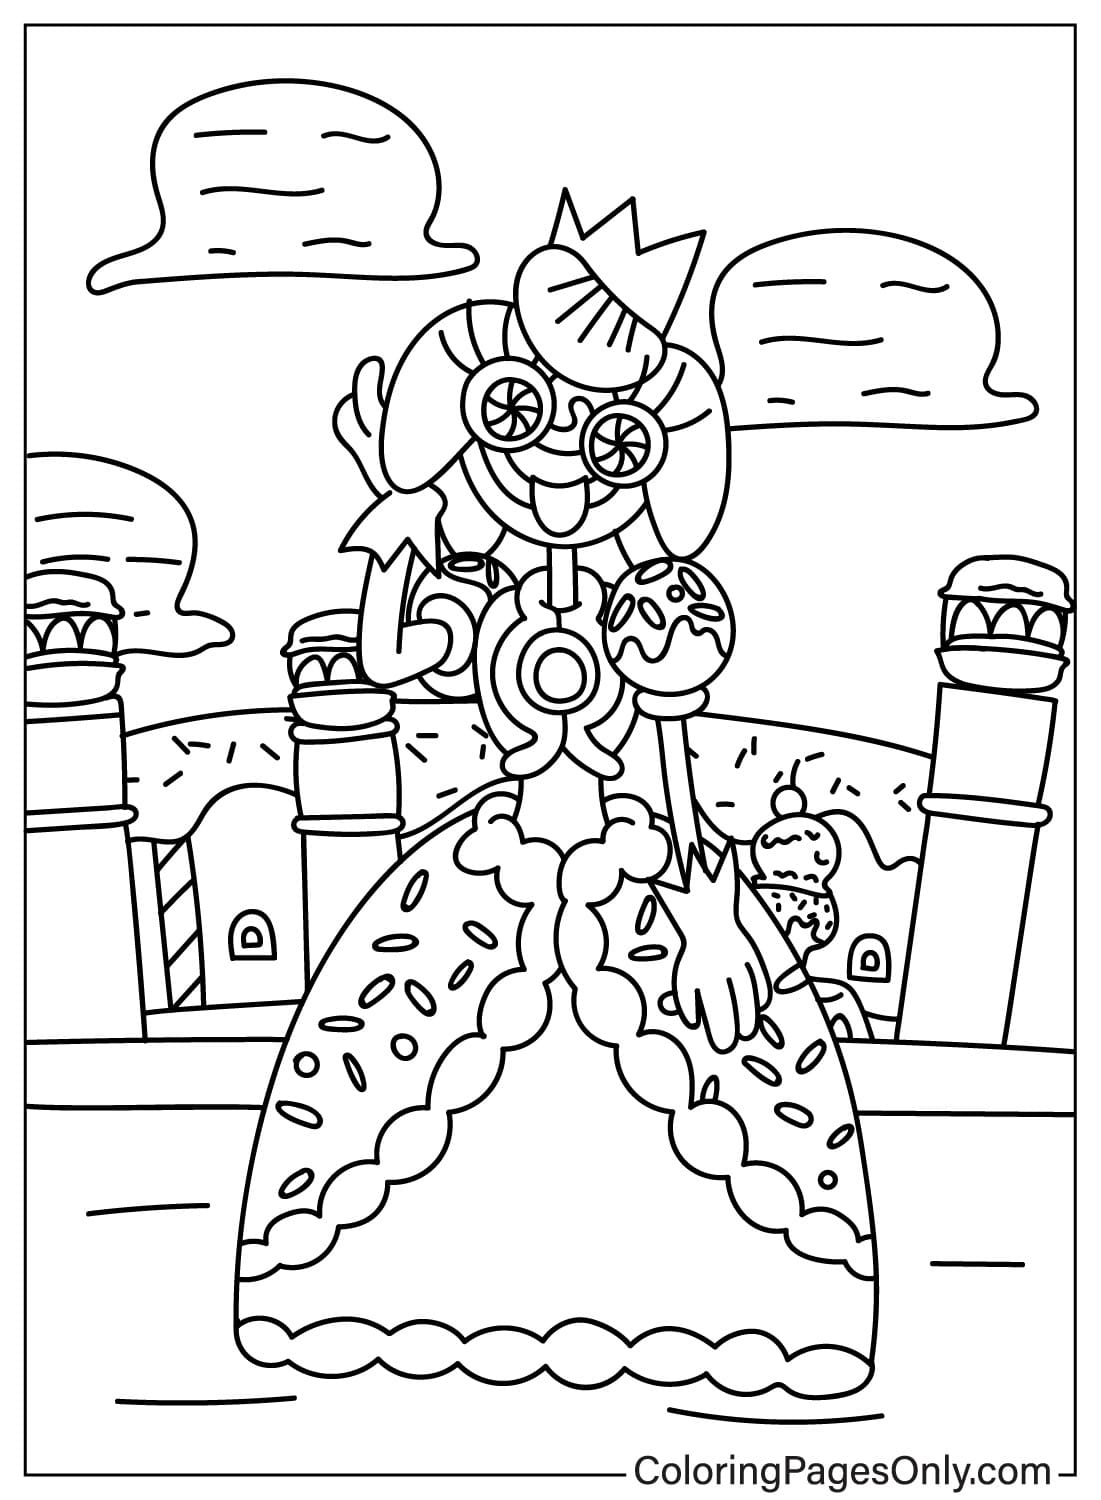 Pictures Princess Loolilalu Coloring Page from Princess Loolilalu